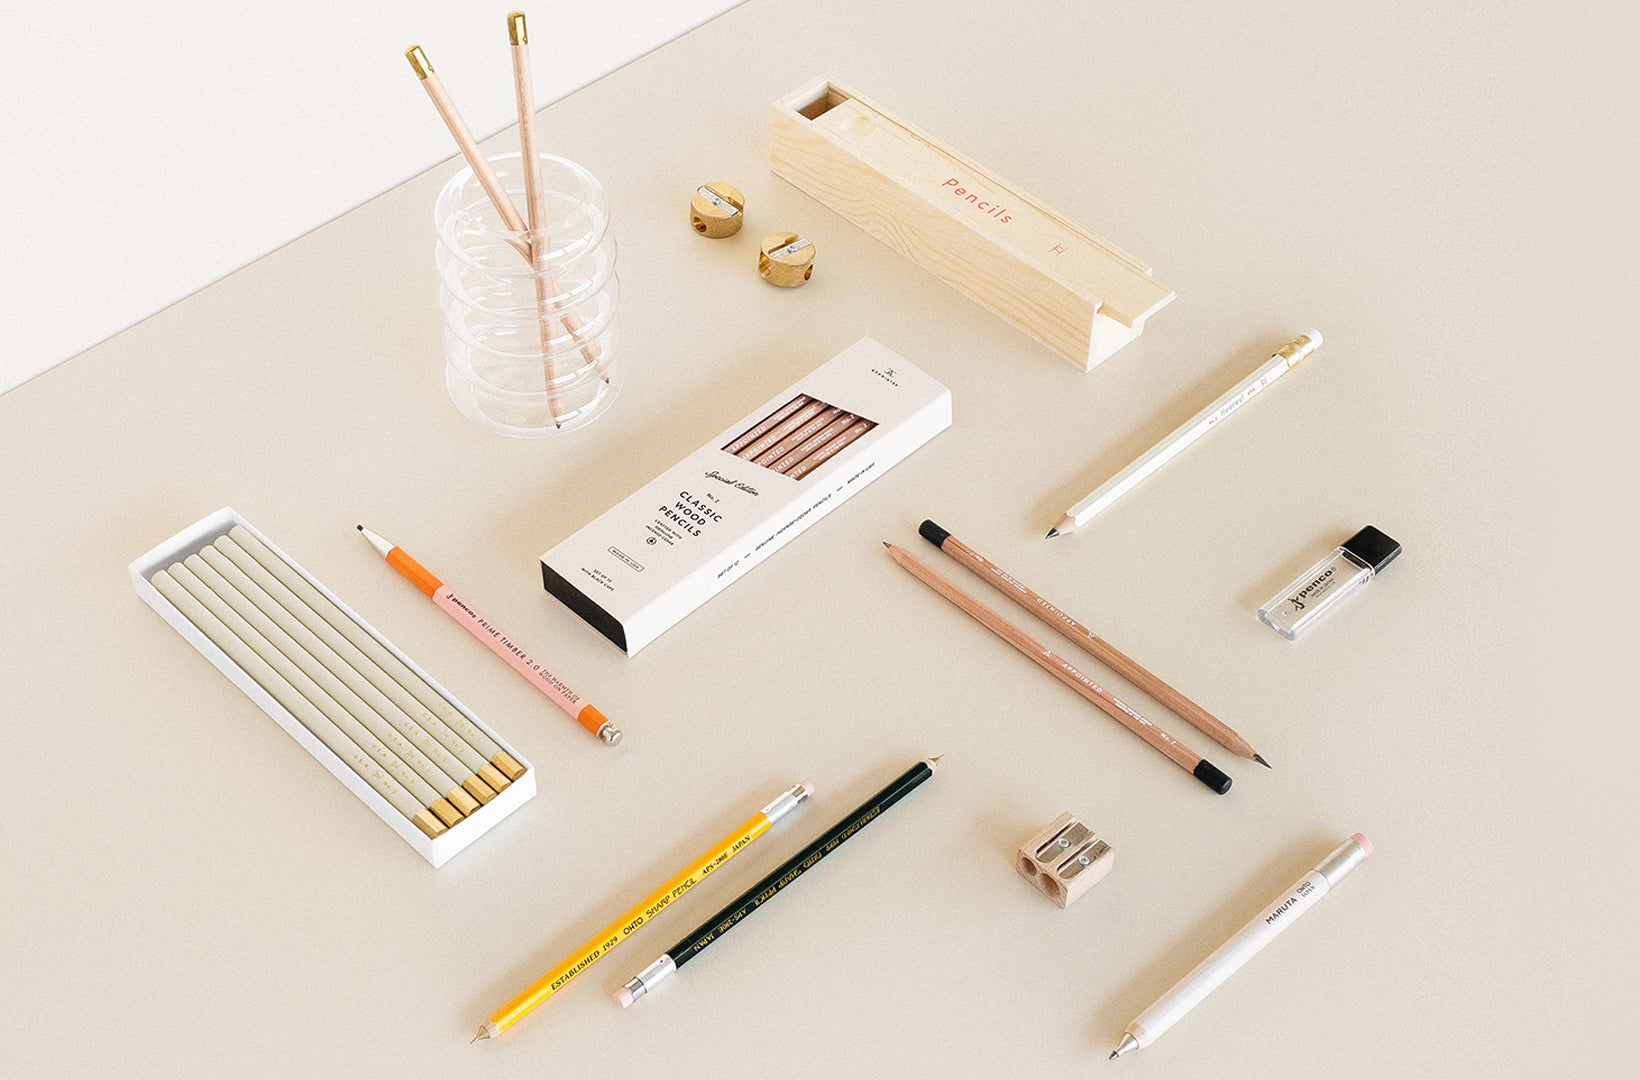 A selection of desk accessories and writing tools sit on a beige background, arranged perpendicular to each other in a pleasing way